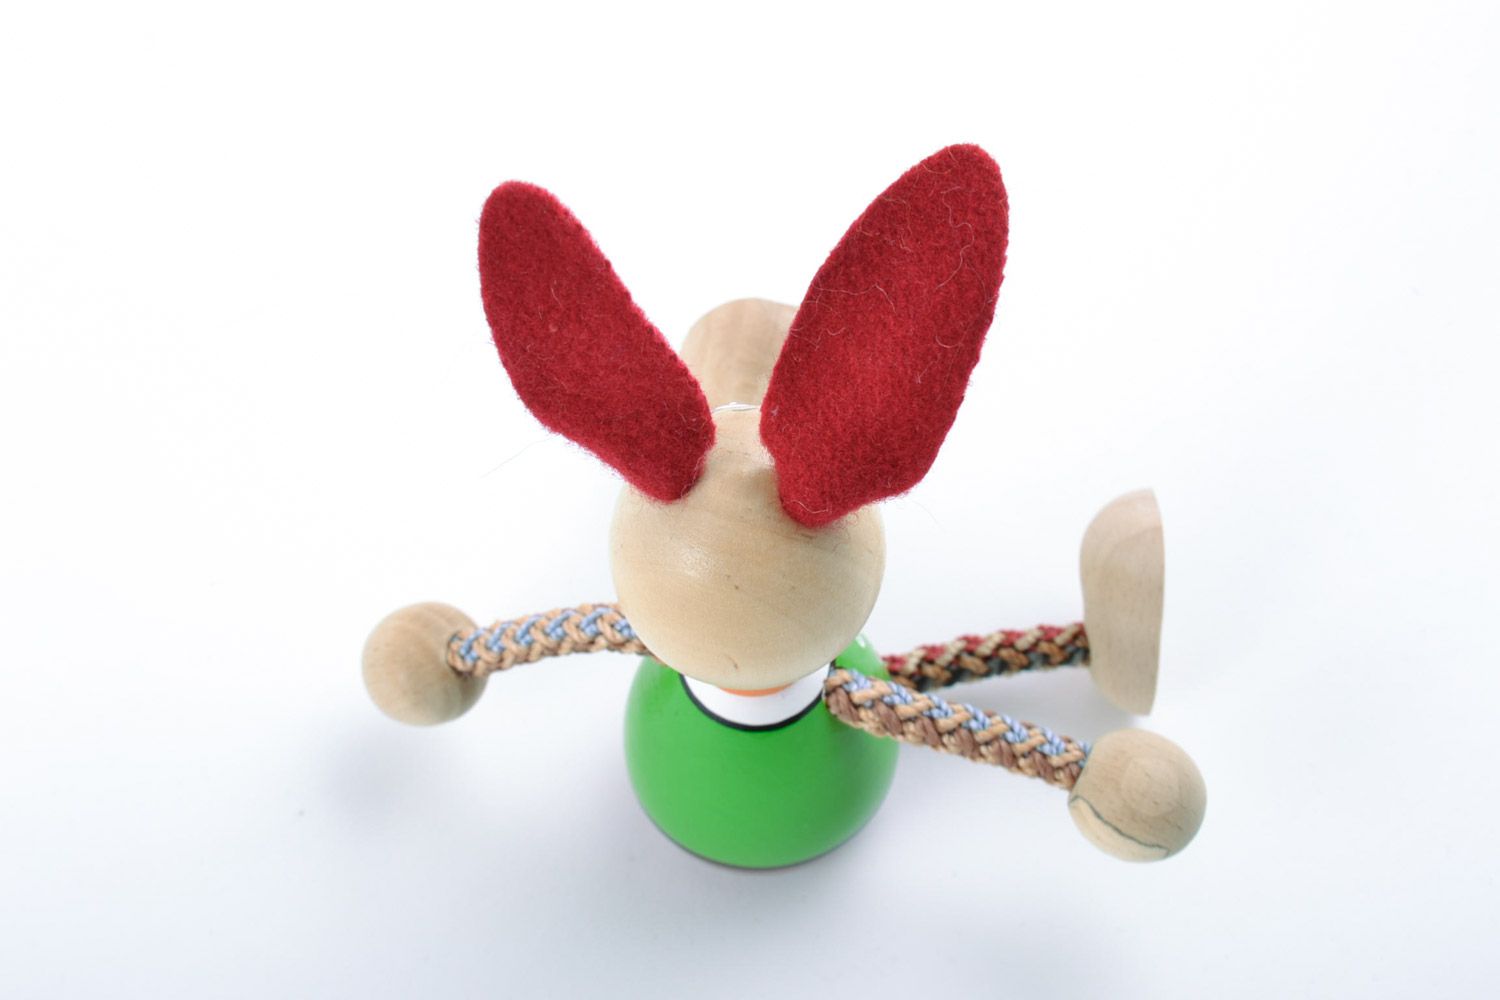 Painted eco friendly wooden homemade eco toy rabbit with red ears for children photo 5